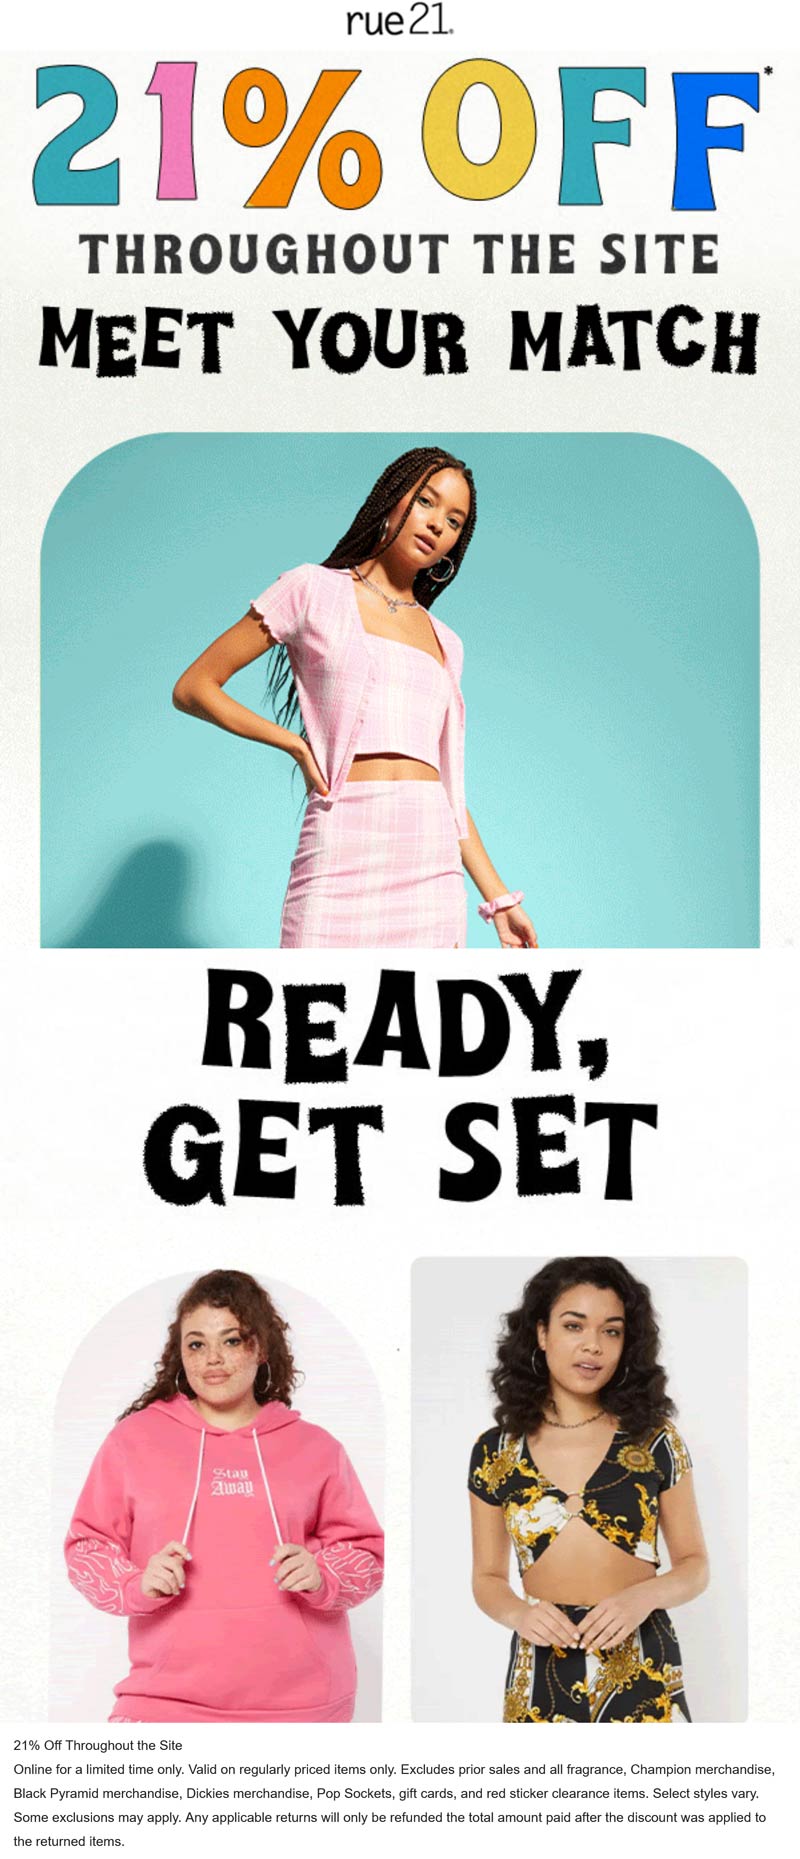 rue21 stores Coupon  21% off online at rue21 #rue21 